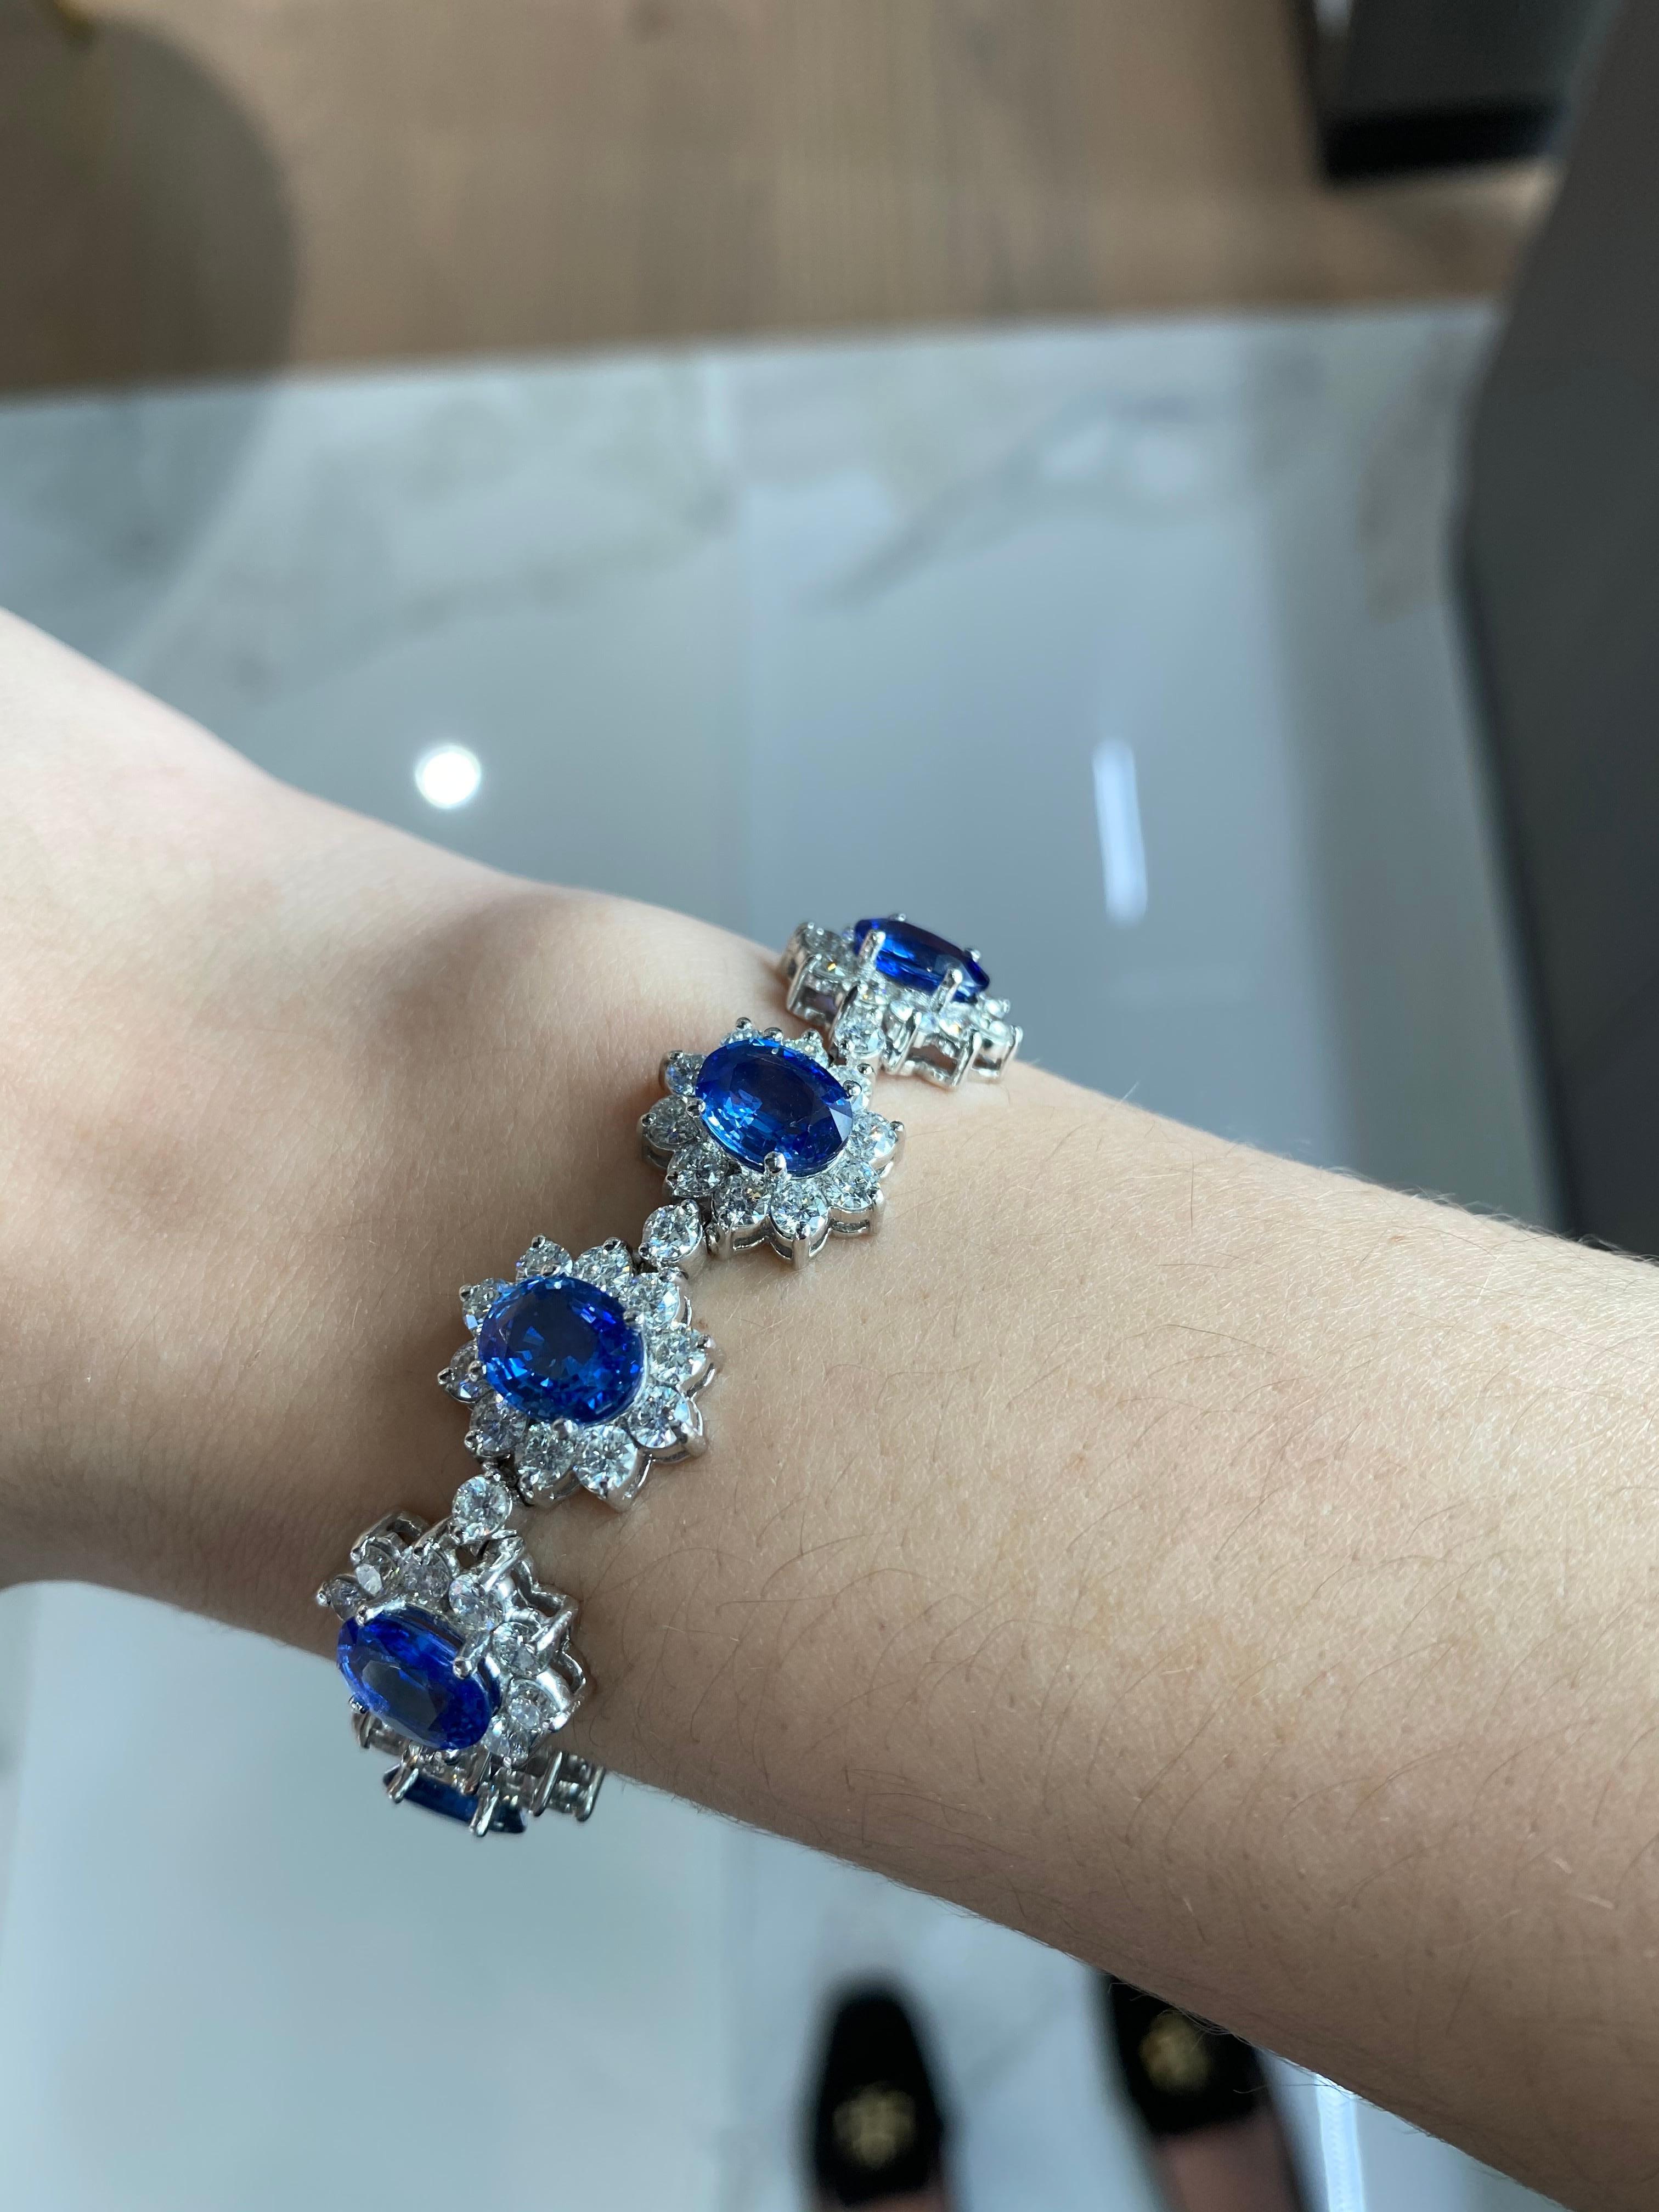 This absolutely exquisite bracelet features a whopping 22.96ct total weight in 11 oval shaped, richly saturated, blue natural sapphires, surrounded by round diamond halos forming a floral shape. The round diamonds add up to a total weight of